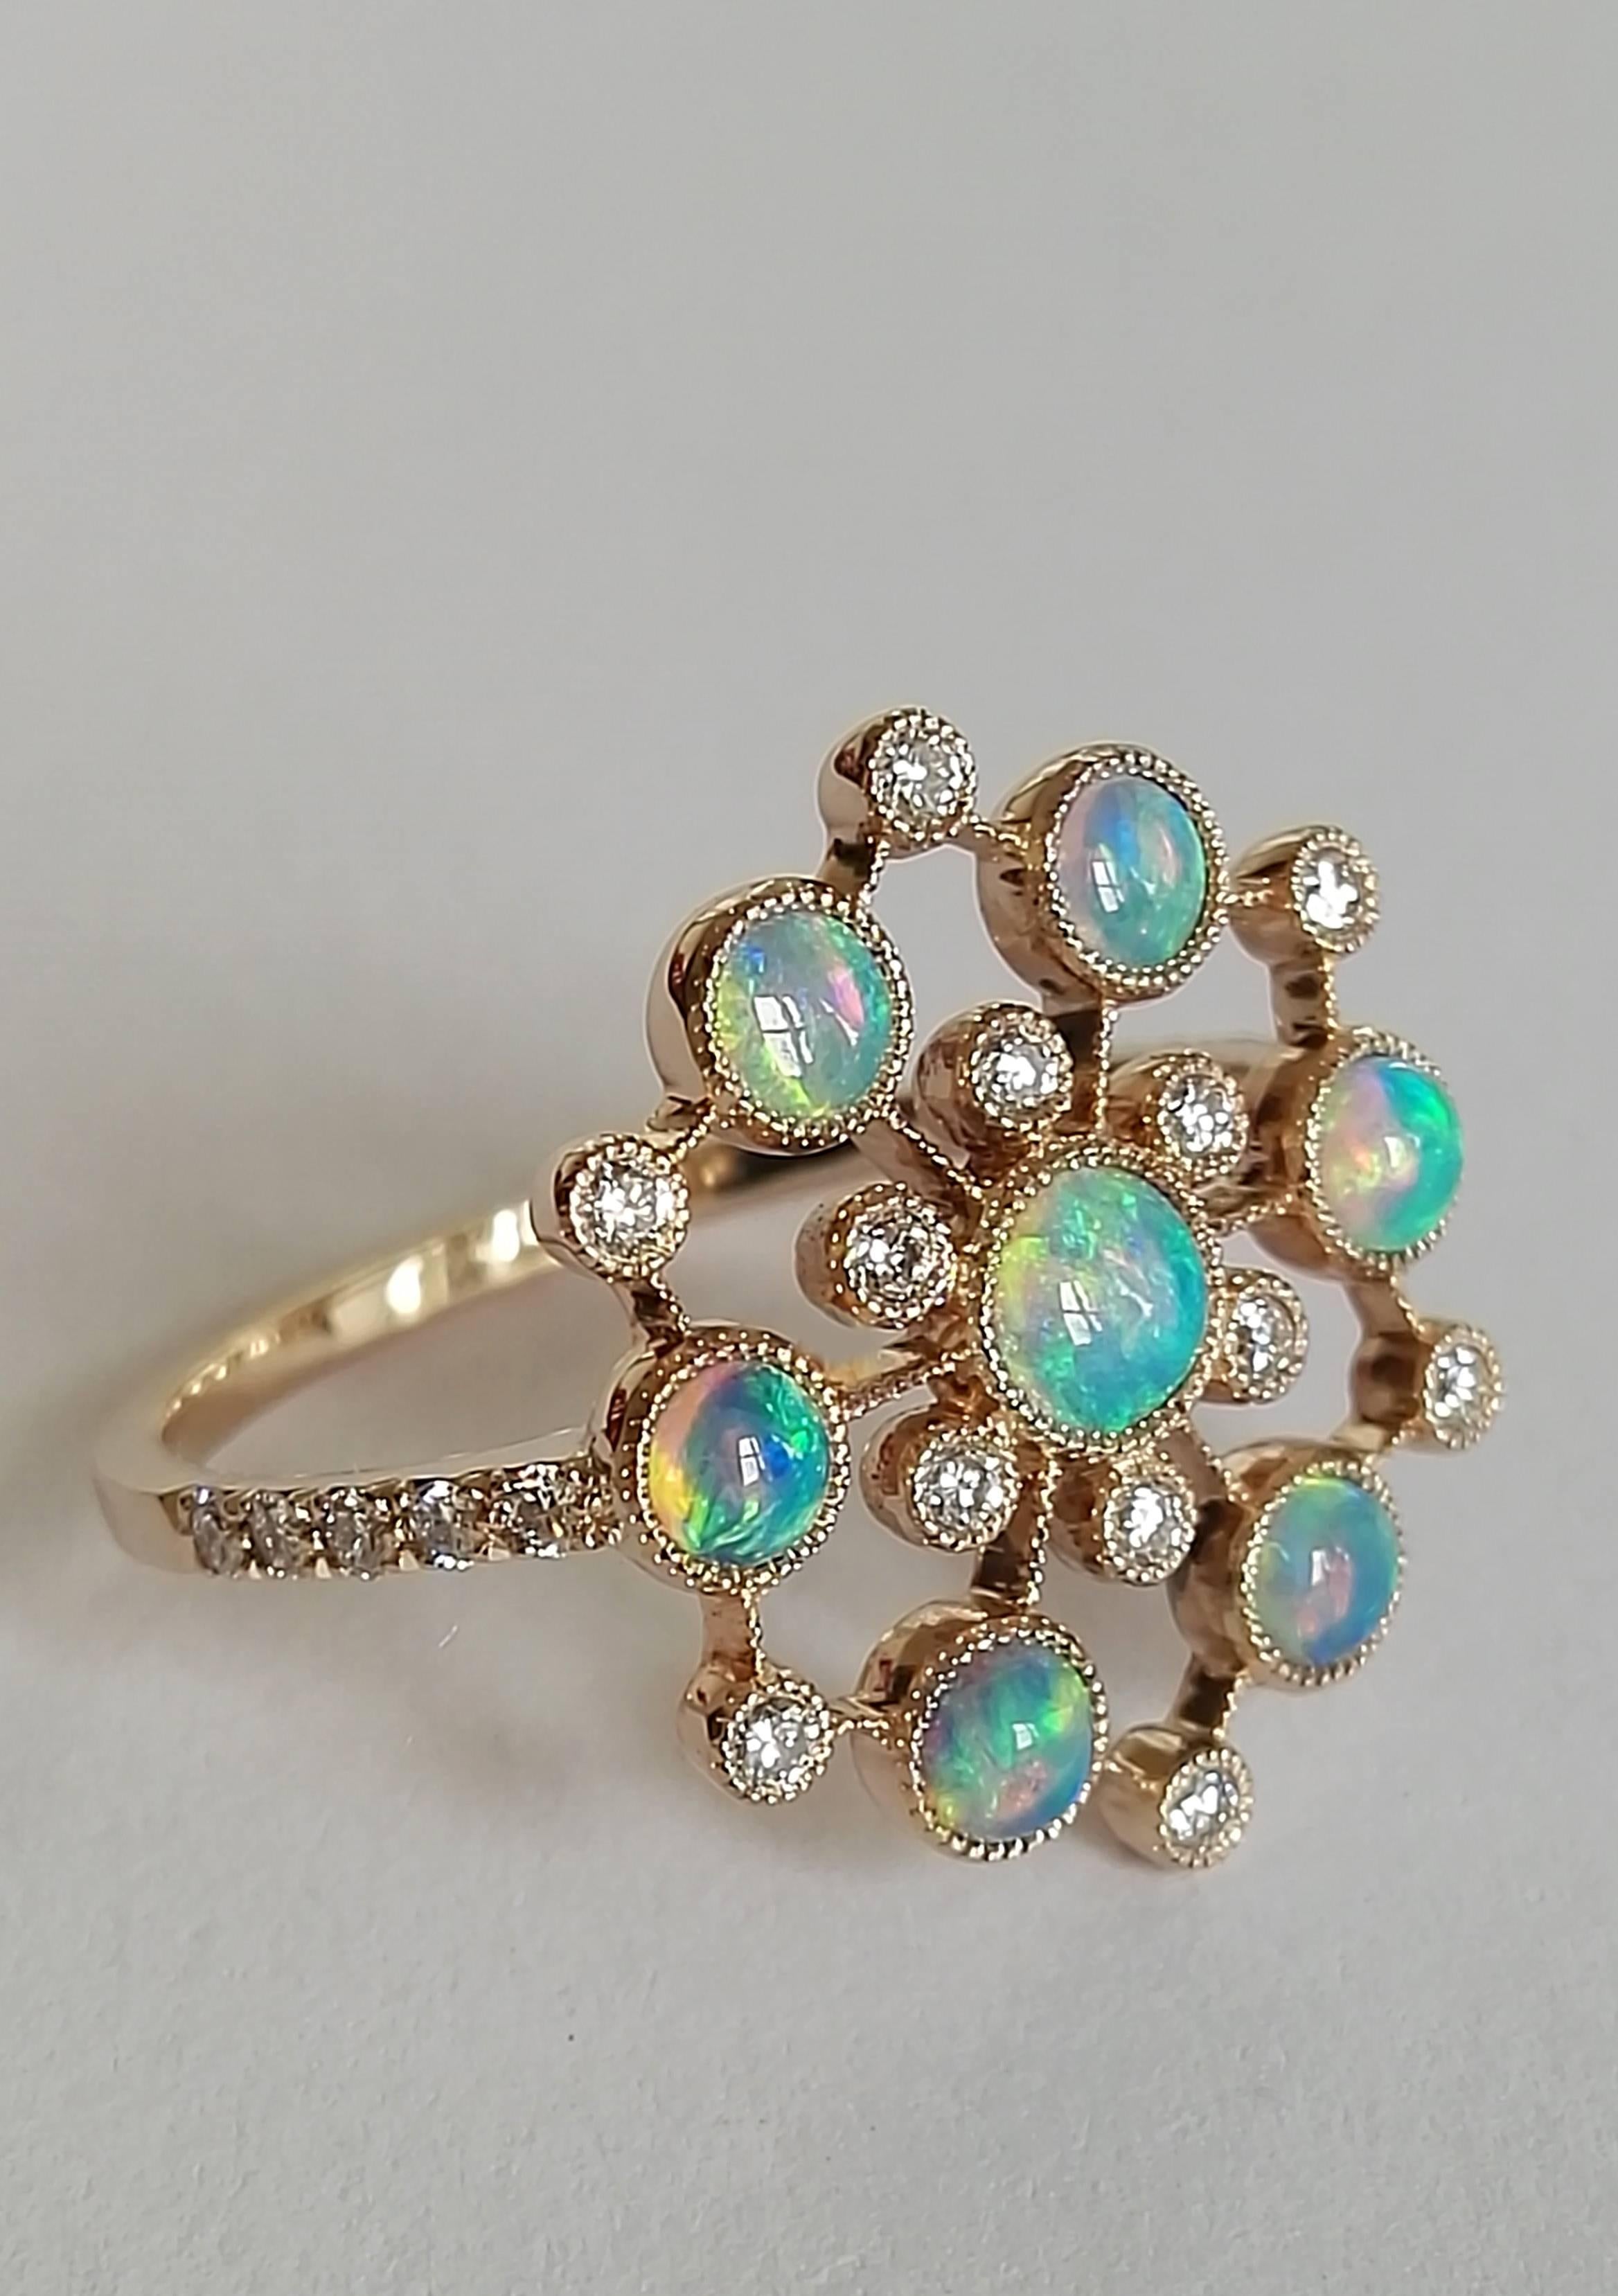 Dalben design Opal ring with 7 Australian Opals and 22 white round brillant cut Diamonds weighing 0,25 carats mounted in 18 kt warm white gold.  Ring size7 1/2 USA - 56 EU .  The Ring has been designed and handcrafted in our atelier in Como Italy